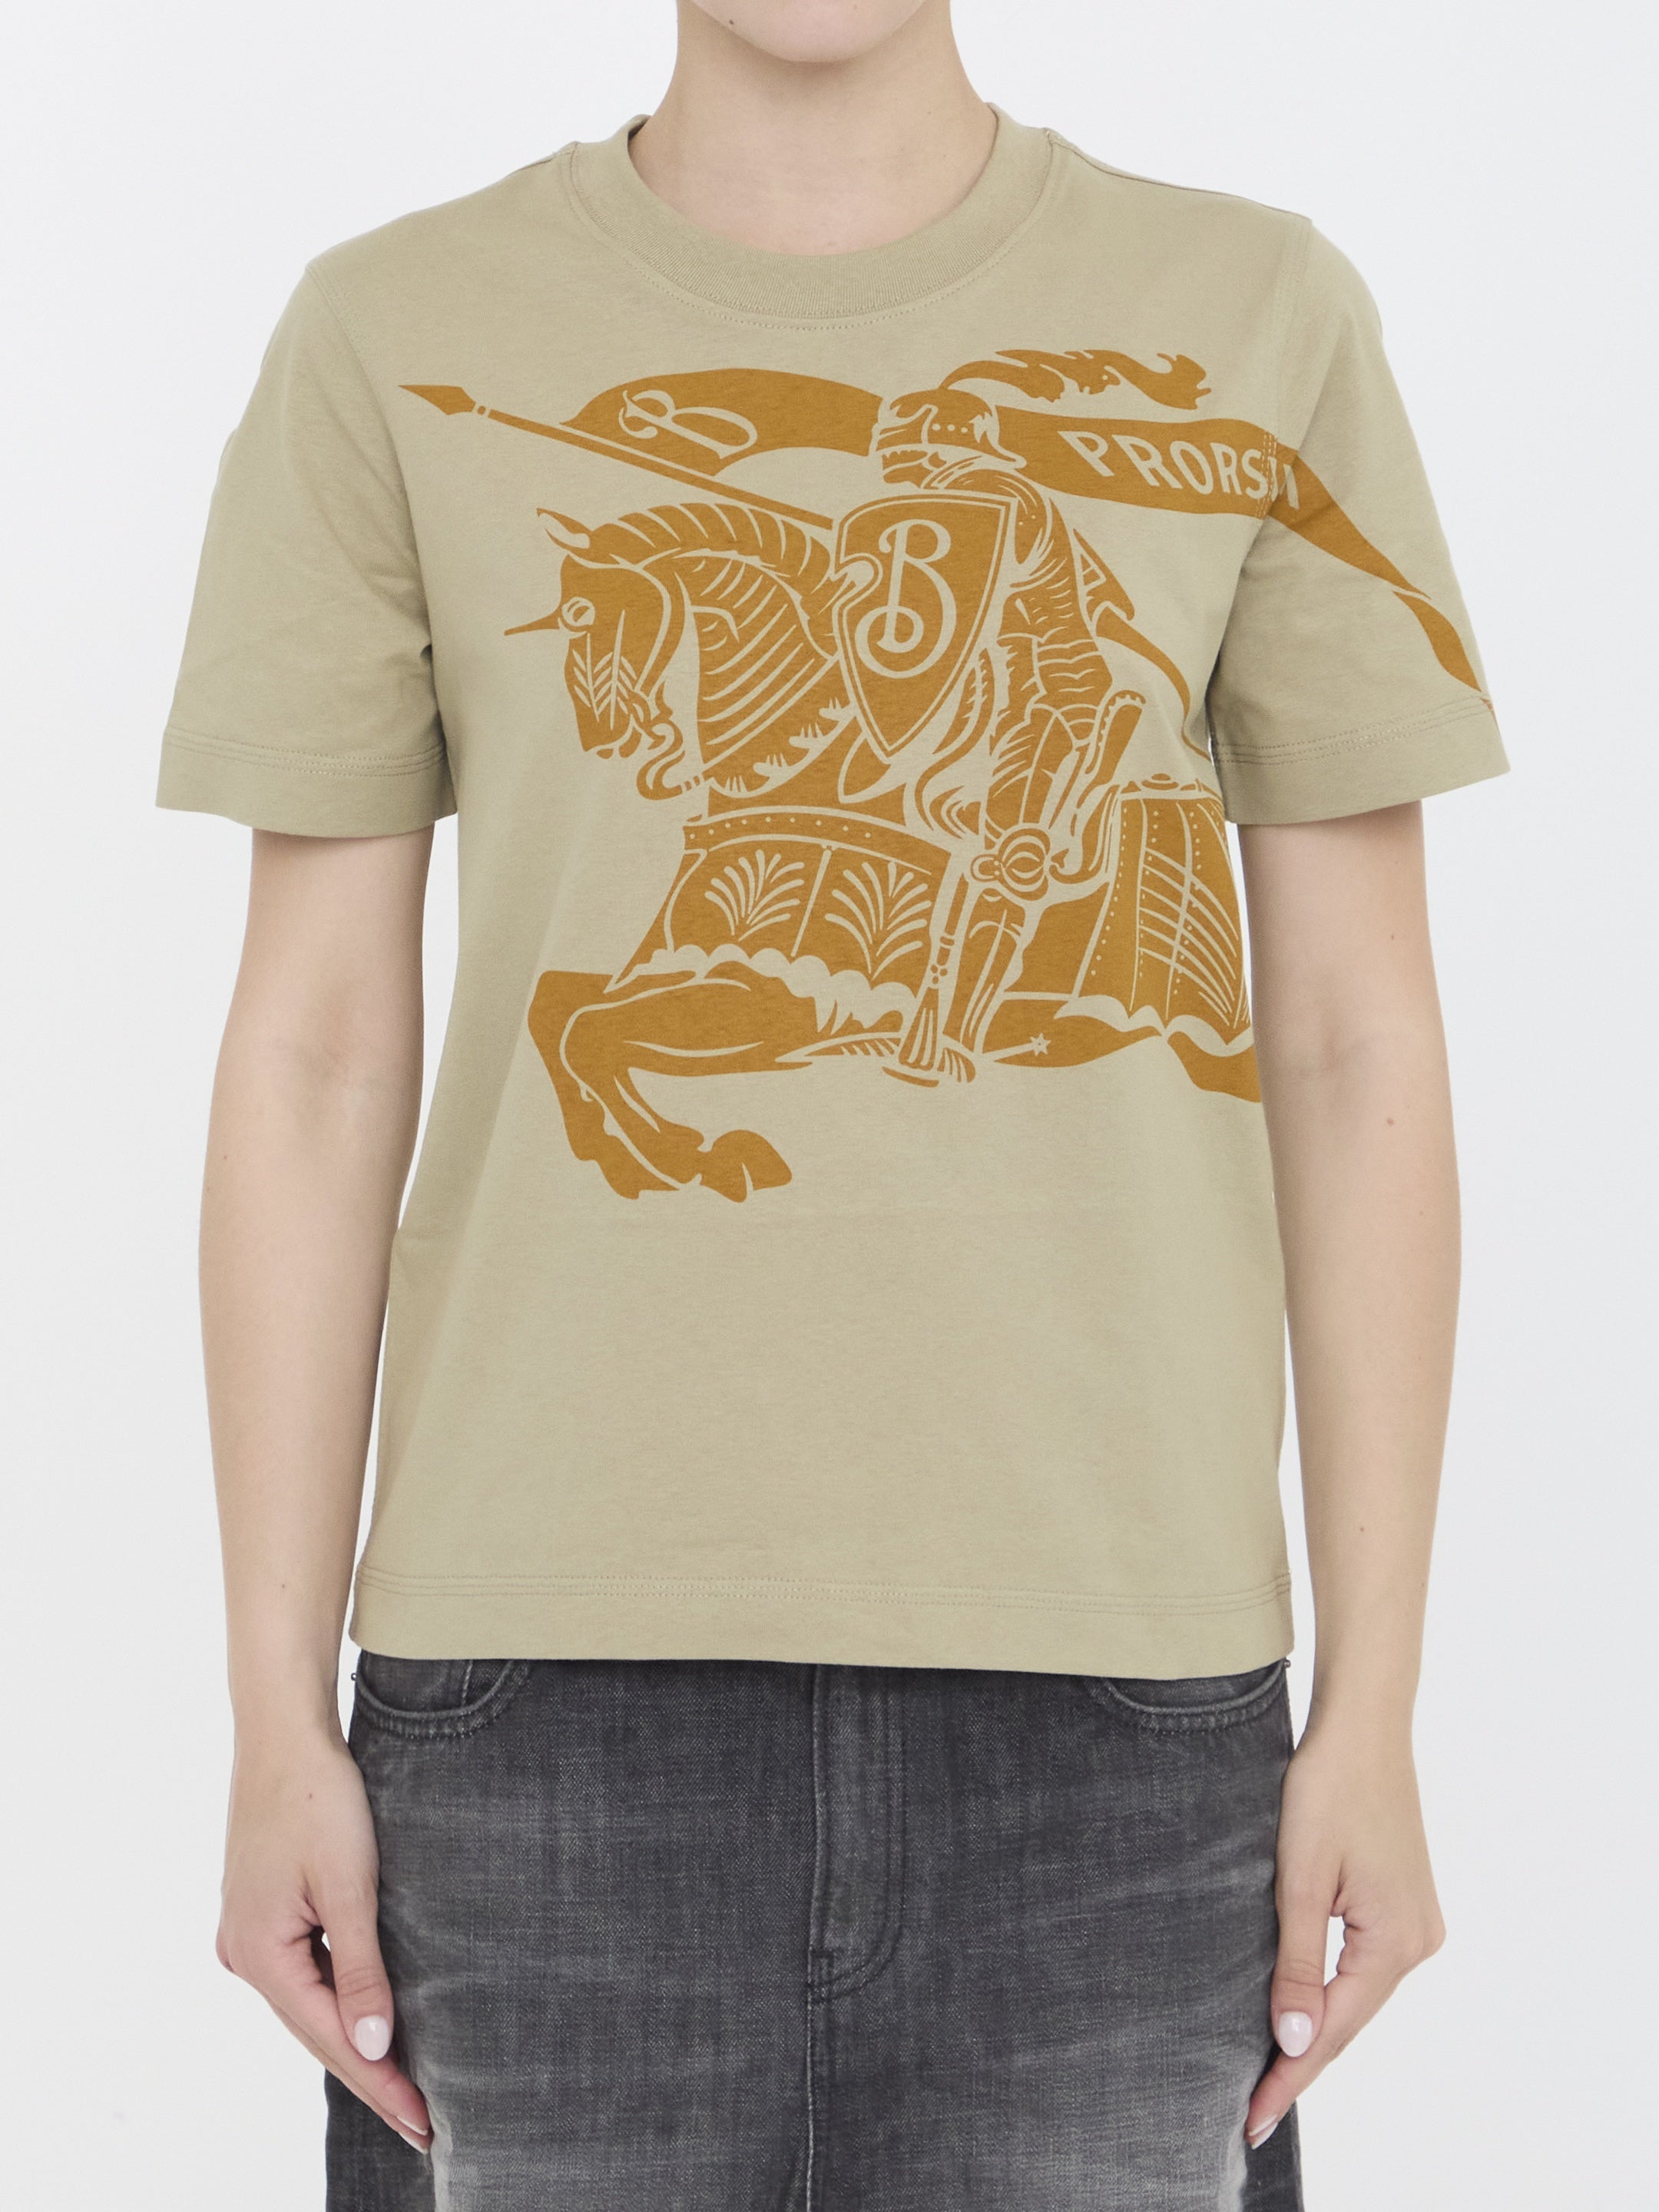 BURBERRY-OUTLET-SALE-EKD-cotton-t-shirt-CLOTHING-M-GREEN-ARCHIVE-COLLECTION.jpg